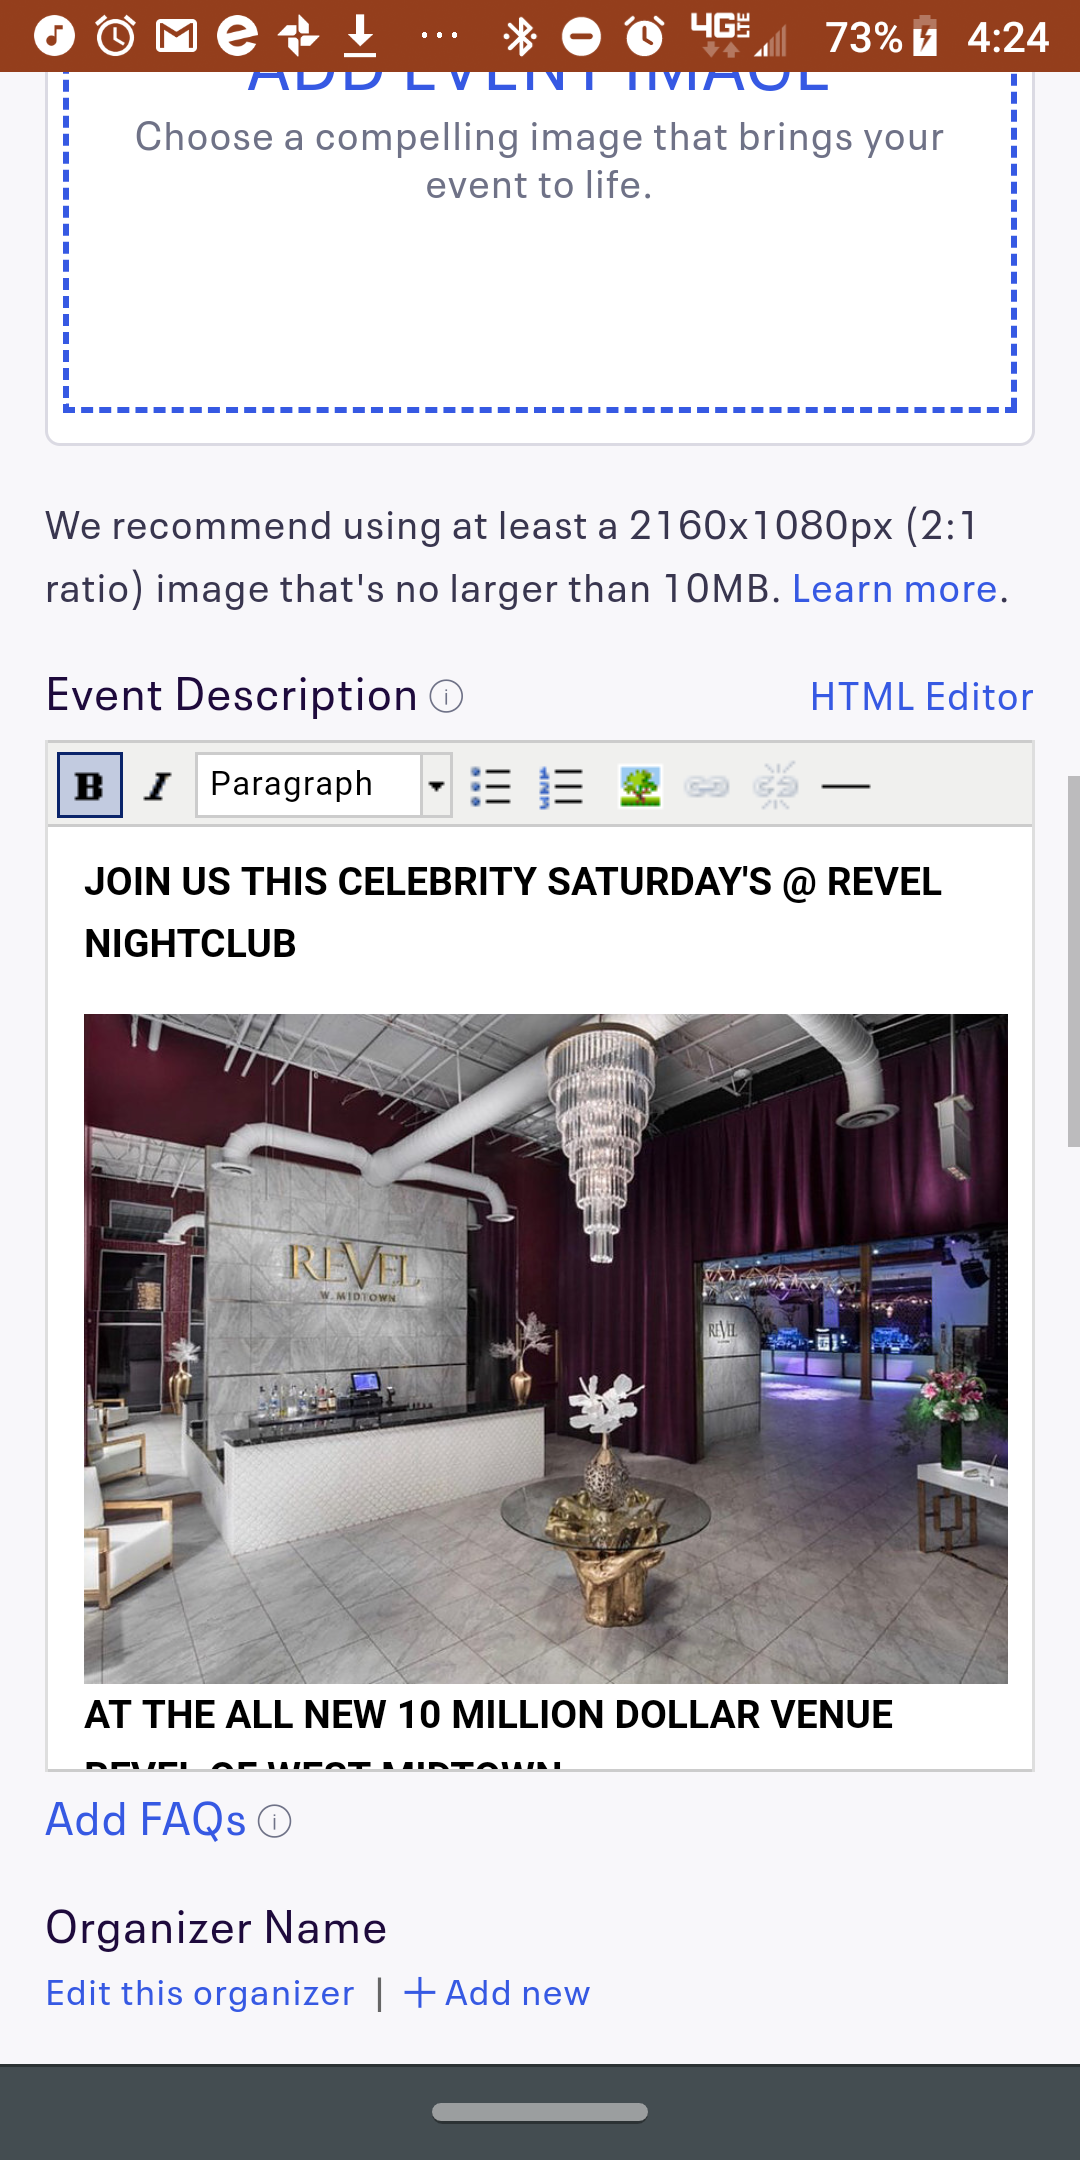 *(BOTTLE SERVICE ONLY)* ATL's #1 Saturday Night Party! Celebrity Saturday's @REVEL! RSVP NOW! (SWIRL) 